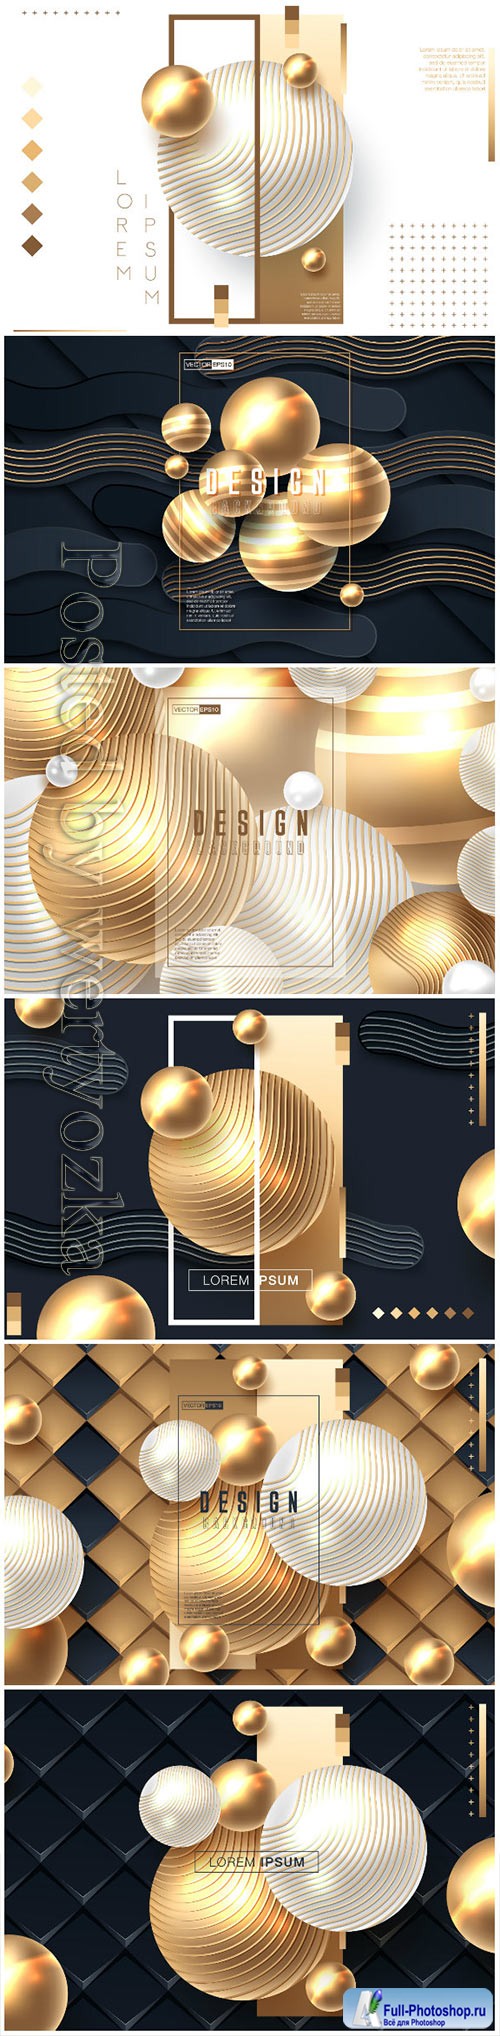 Abstract background with spheres in gold and black color